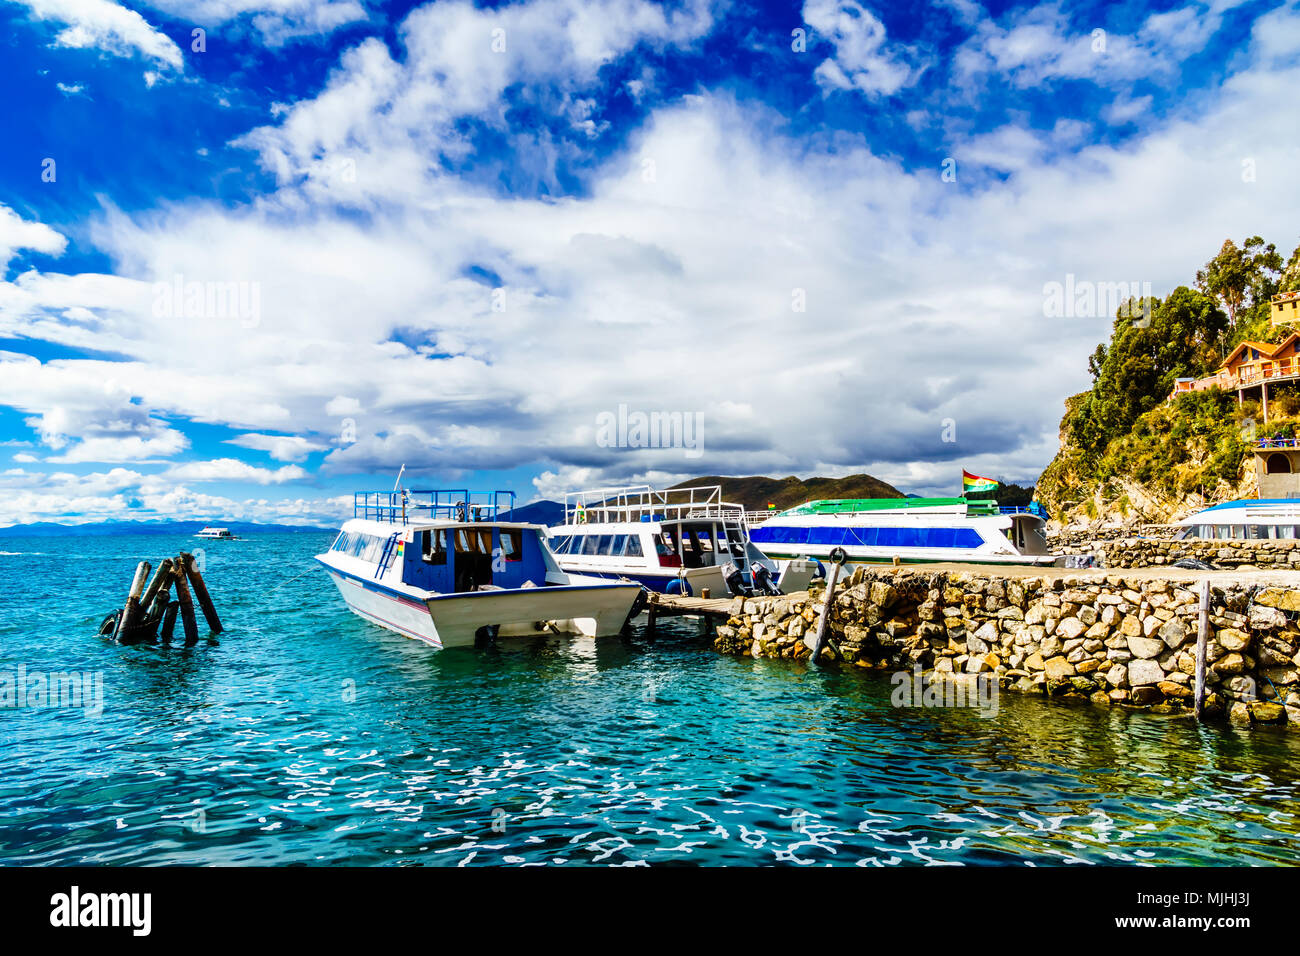 View on Ferry by Copacabana on the way to isla del sol - Bolivia Stock Photo